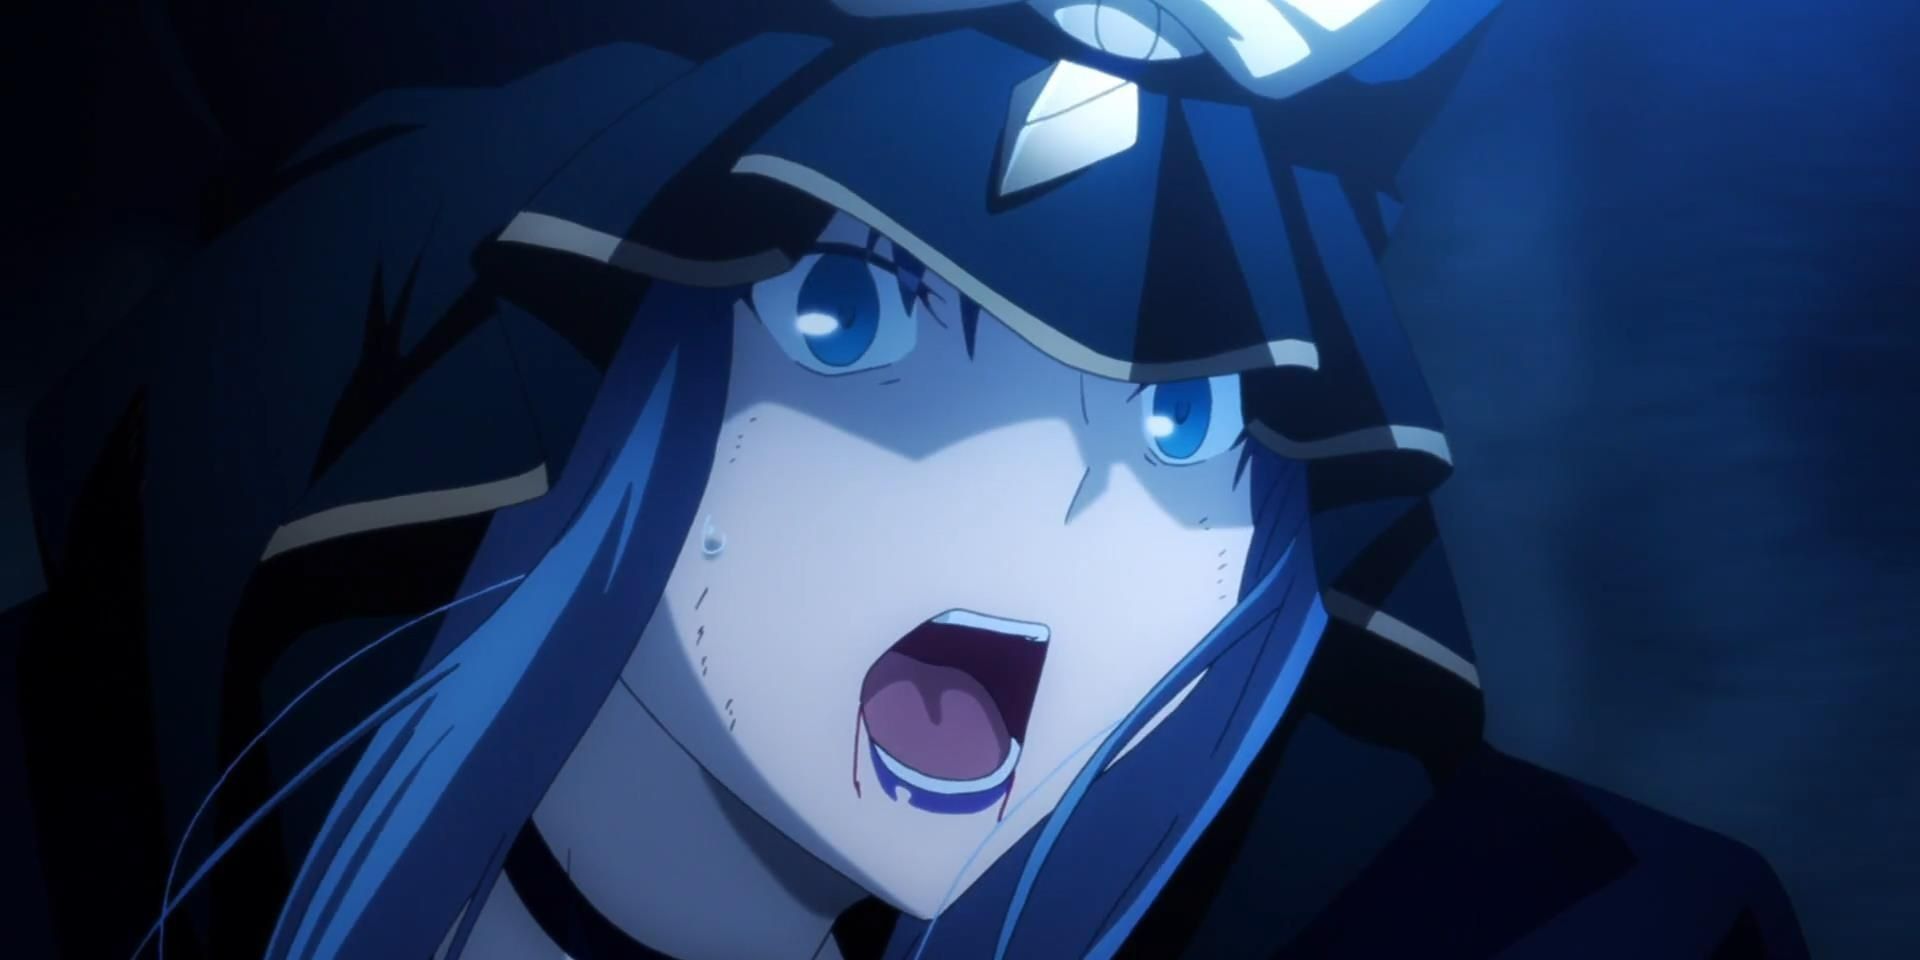 Caster yelling out in Fate/Stay Night the anime